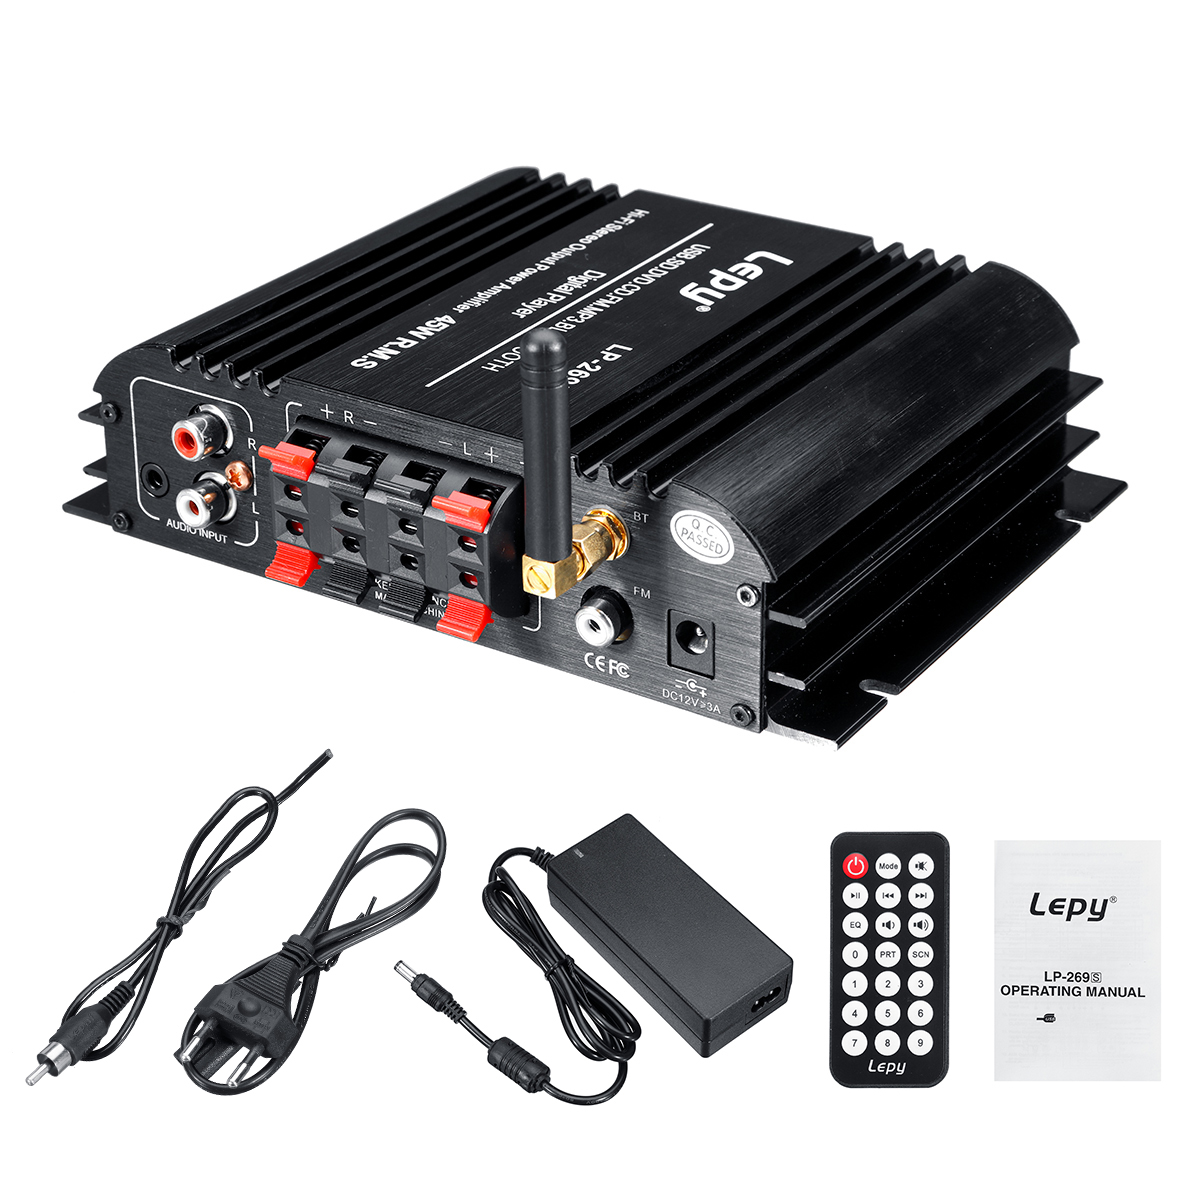 

LP-269S HiFi Digital Stereo Bluetooth Amplifier US Plug 2 Channel Powerful Sound Compatible With Car Motorcycle Computer